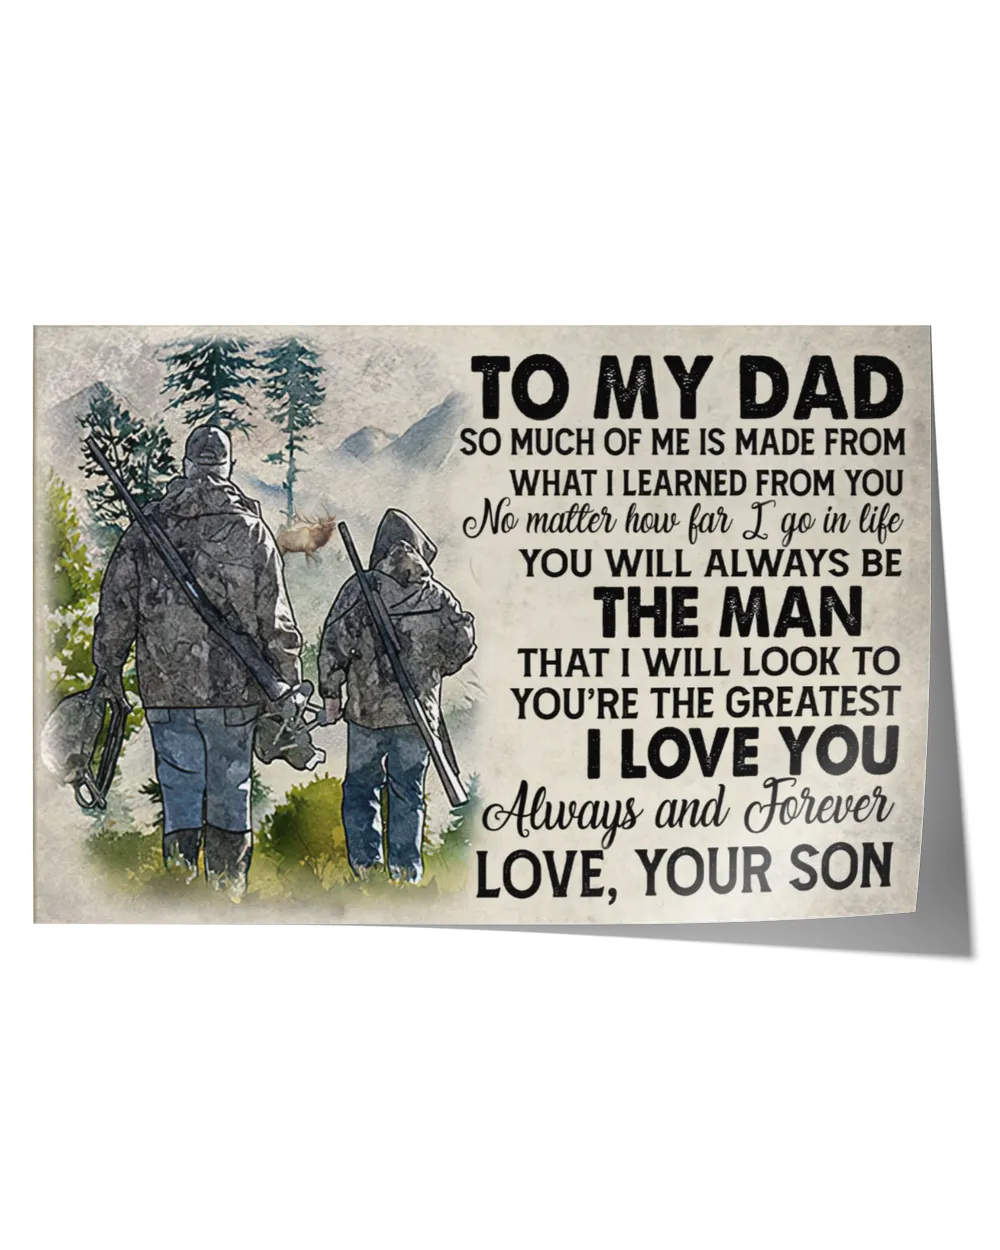 Hunting To my dad poster